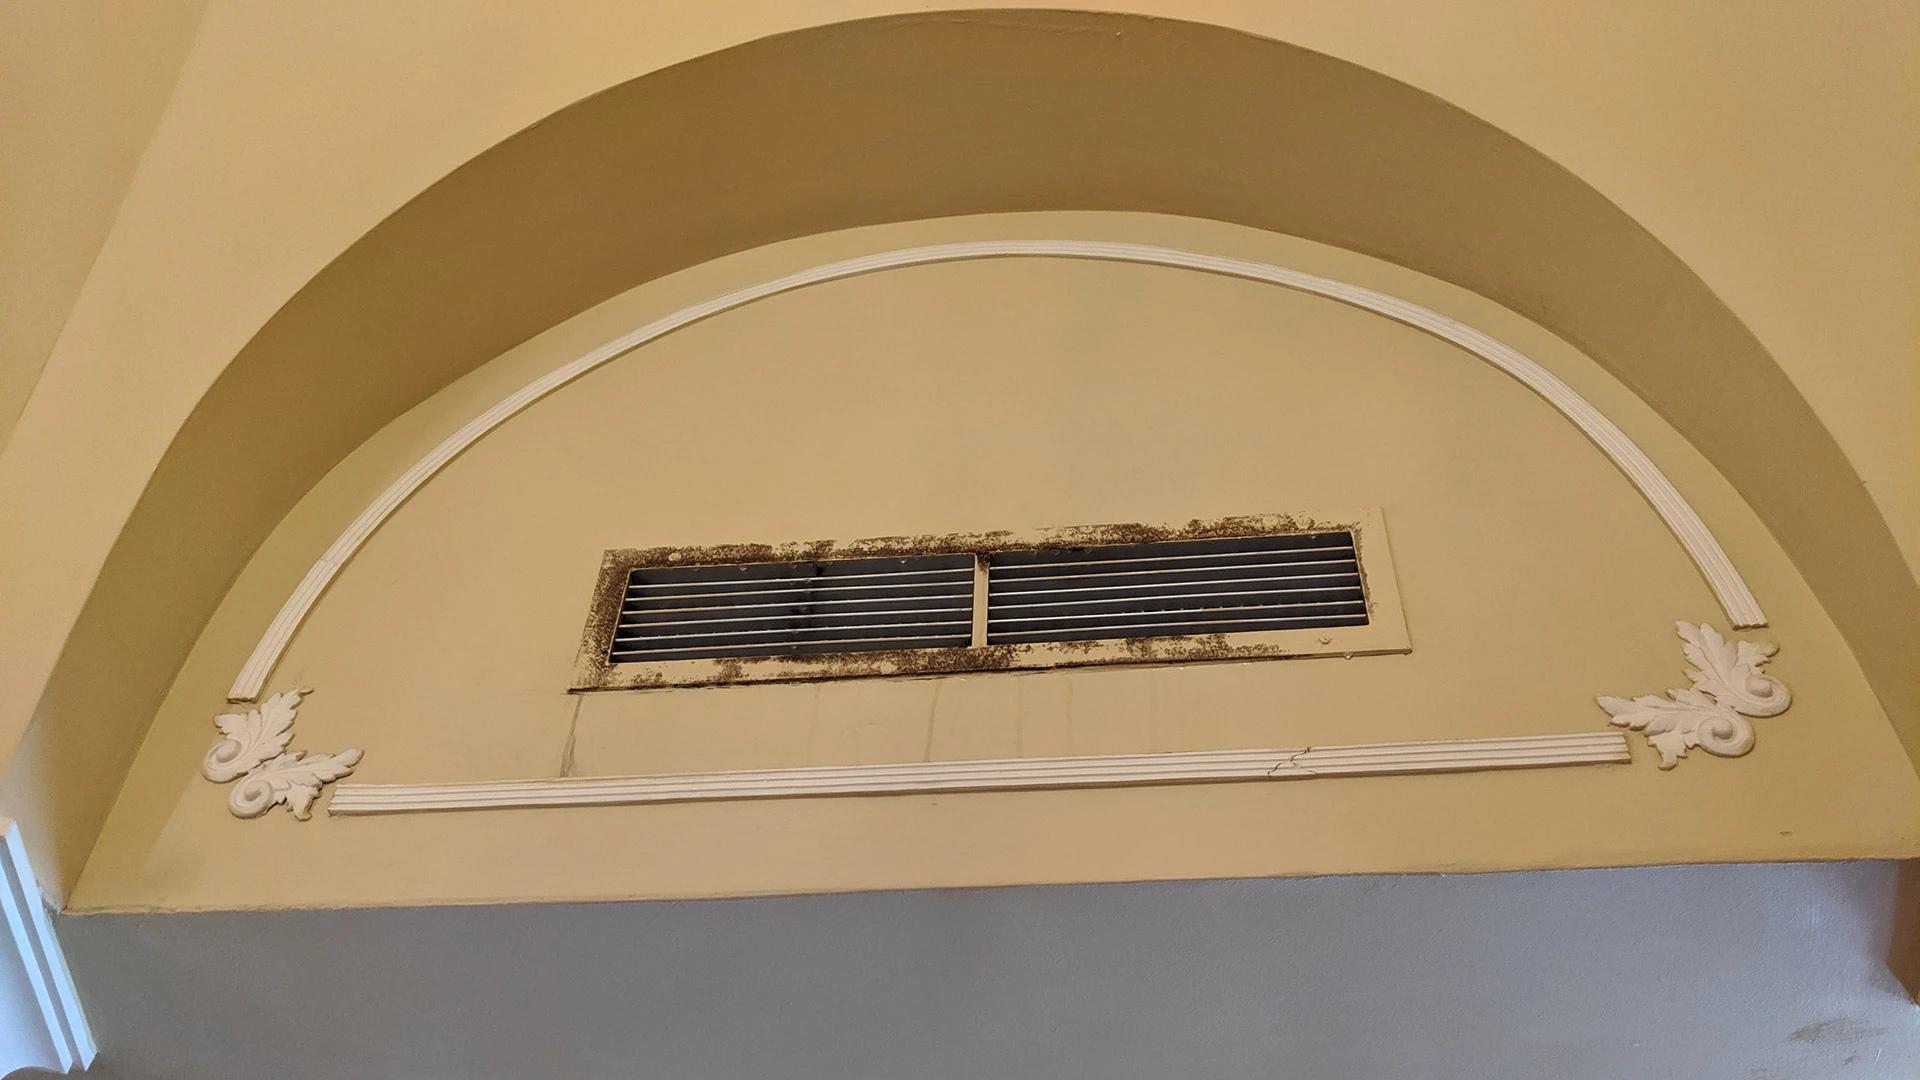 WHAT? Water damage can be caused by your air conditioning unit?